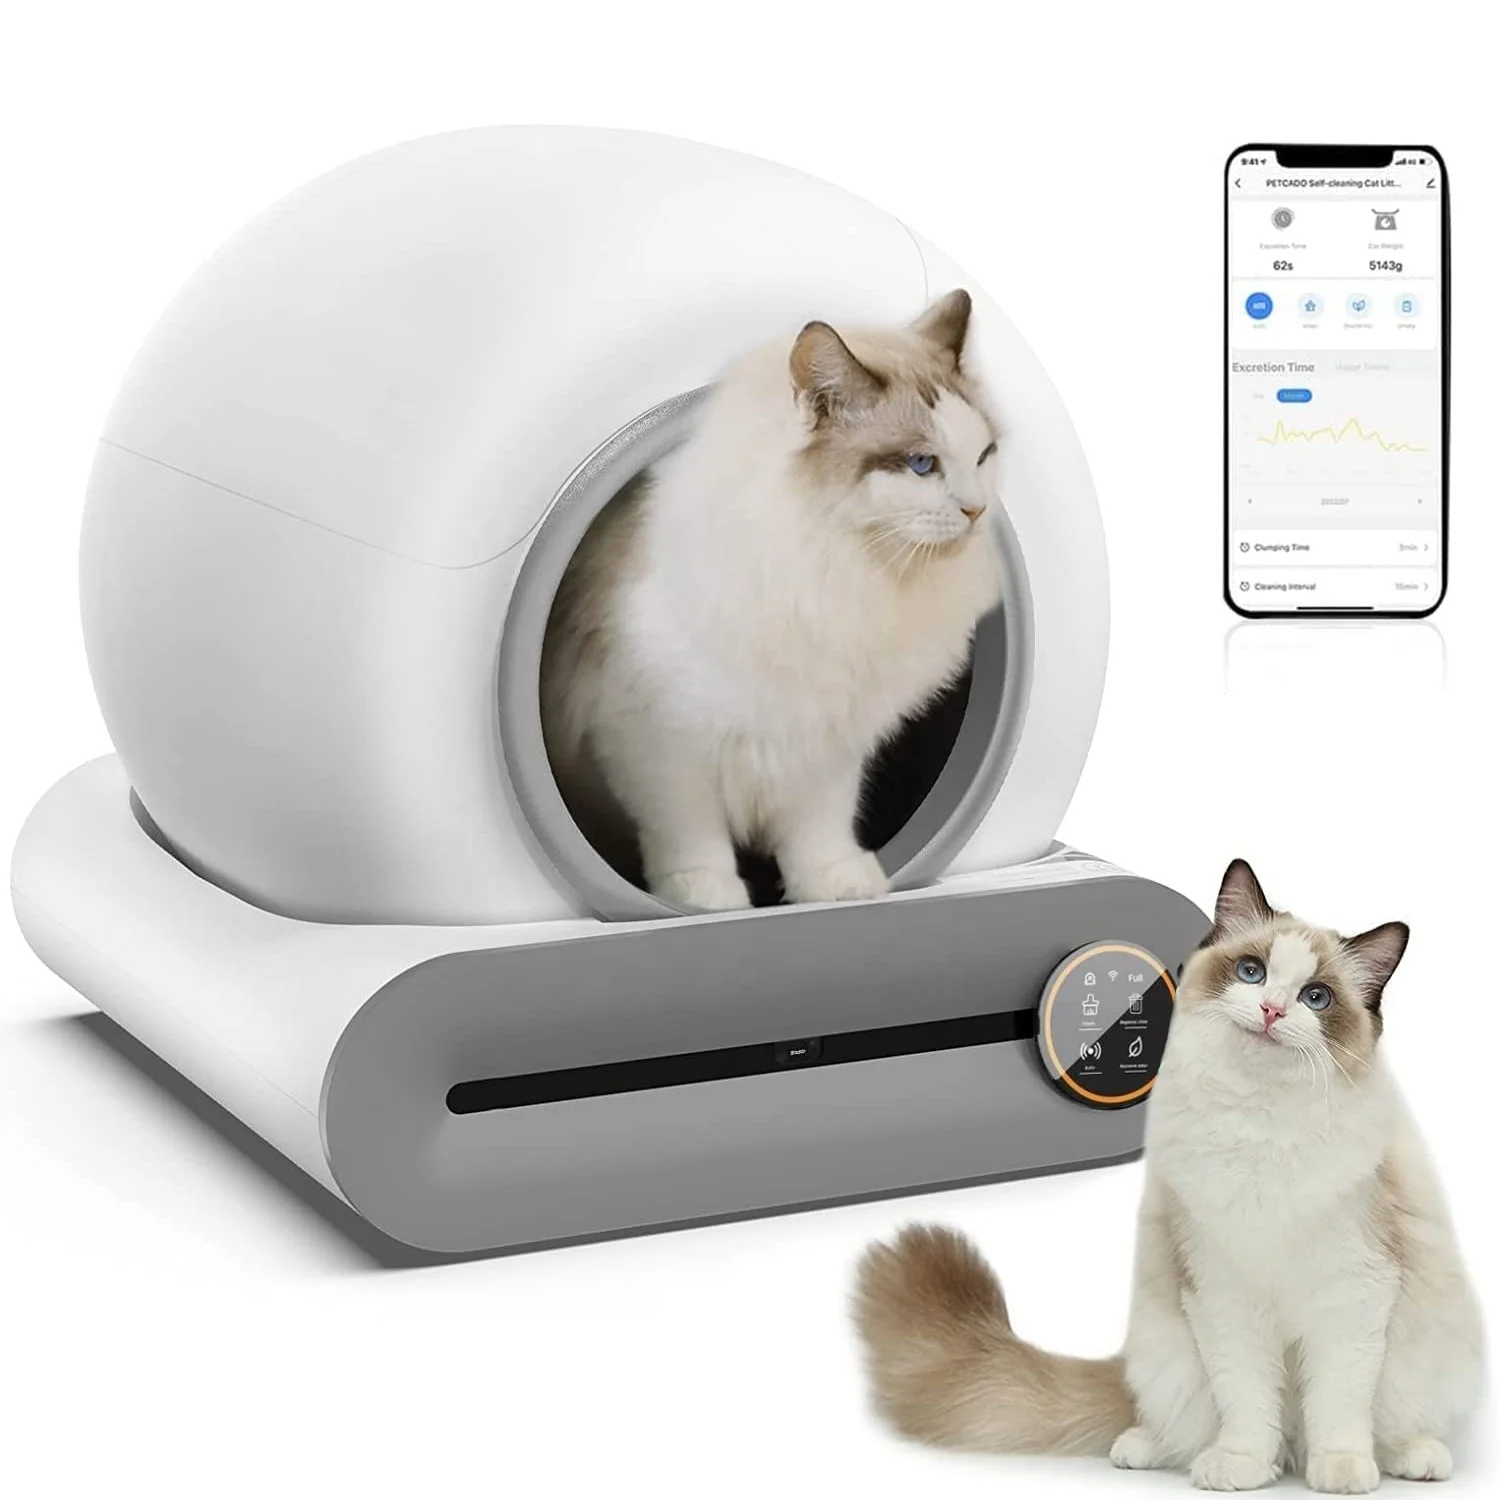 

Large Smart Fully Enclosed APP Remote Control Quick Cleaning Cats Litter Toilet Self-cleaning Automatic Cat Litter Box